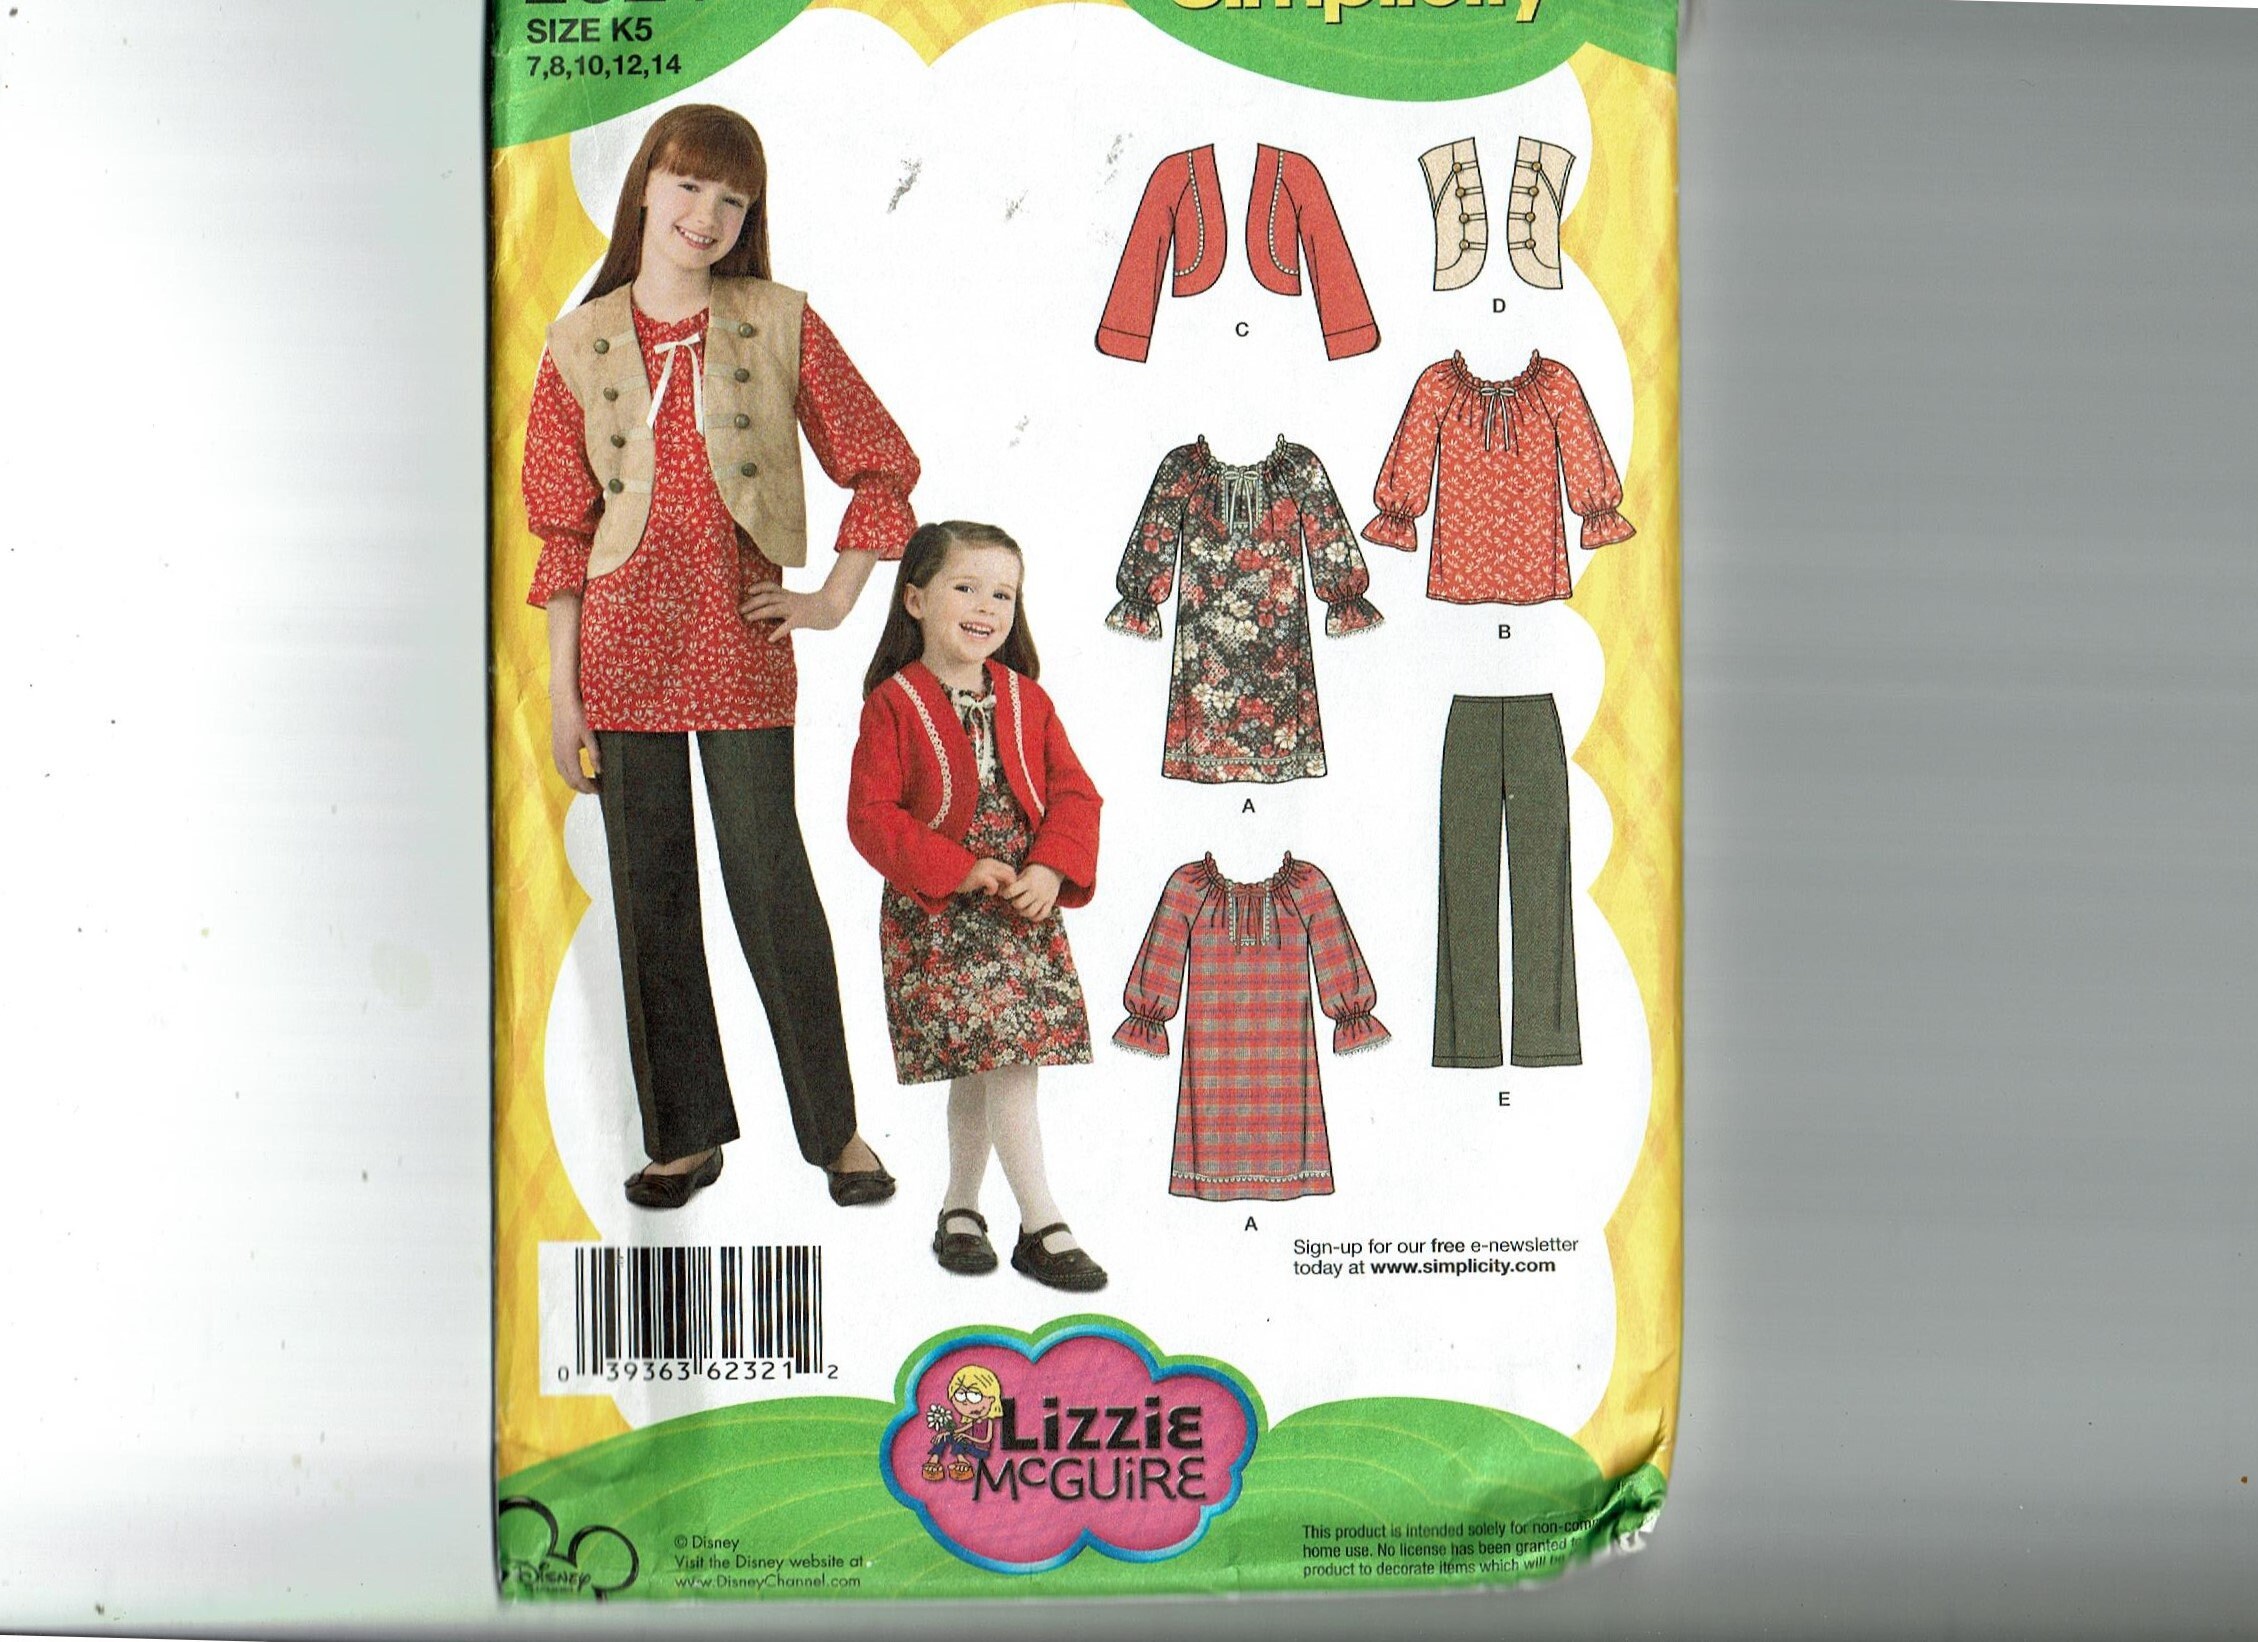 Simplicity Sewing Pattern 2378 Child's and Girl's Dress and Sportswear, K5 (7-8-10-12-14)